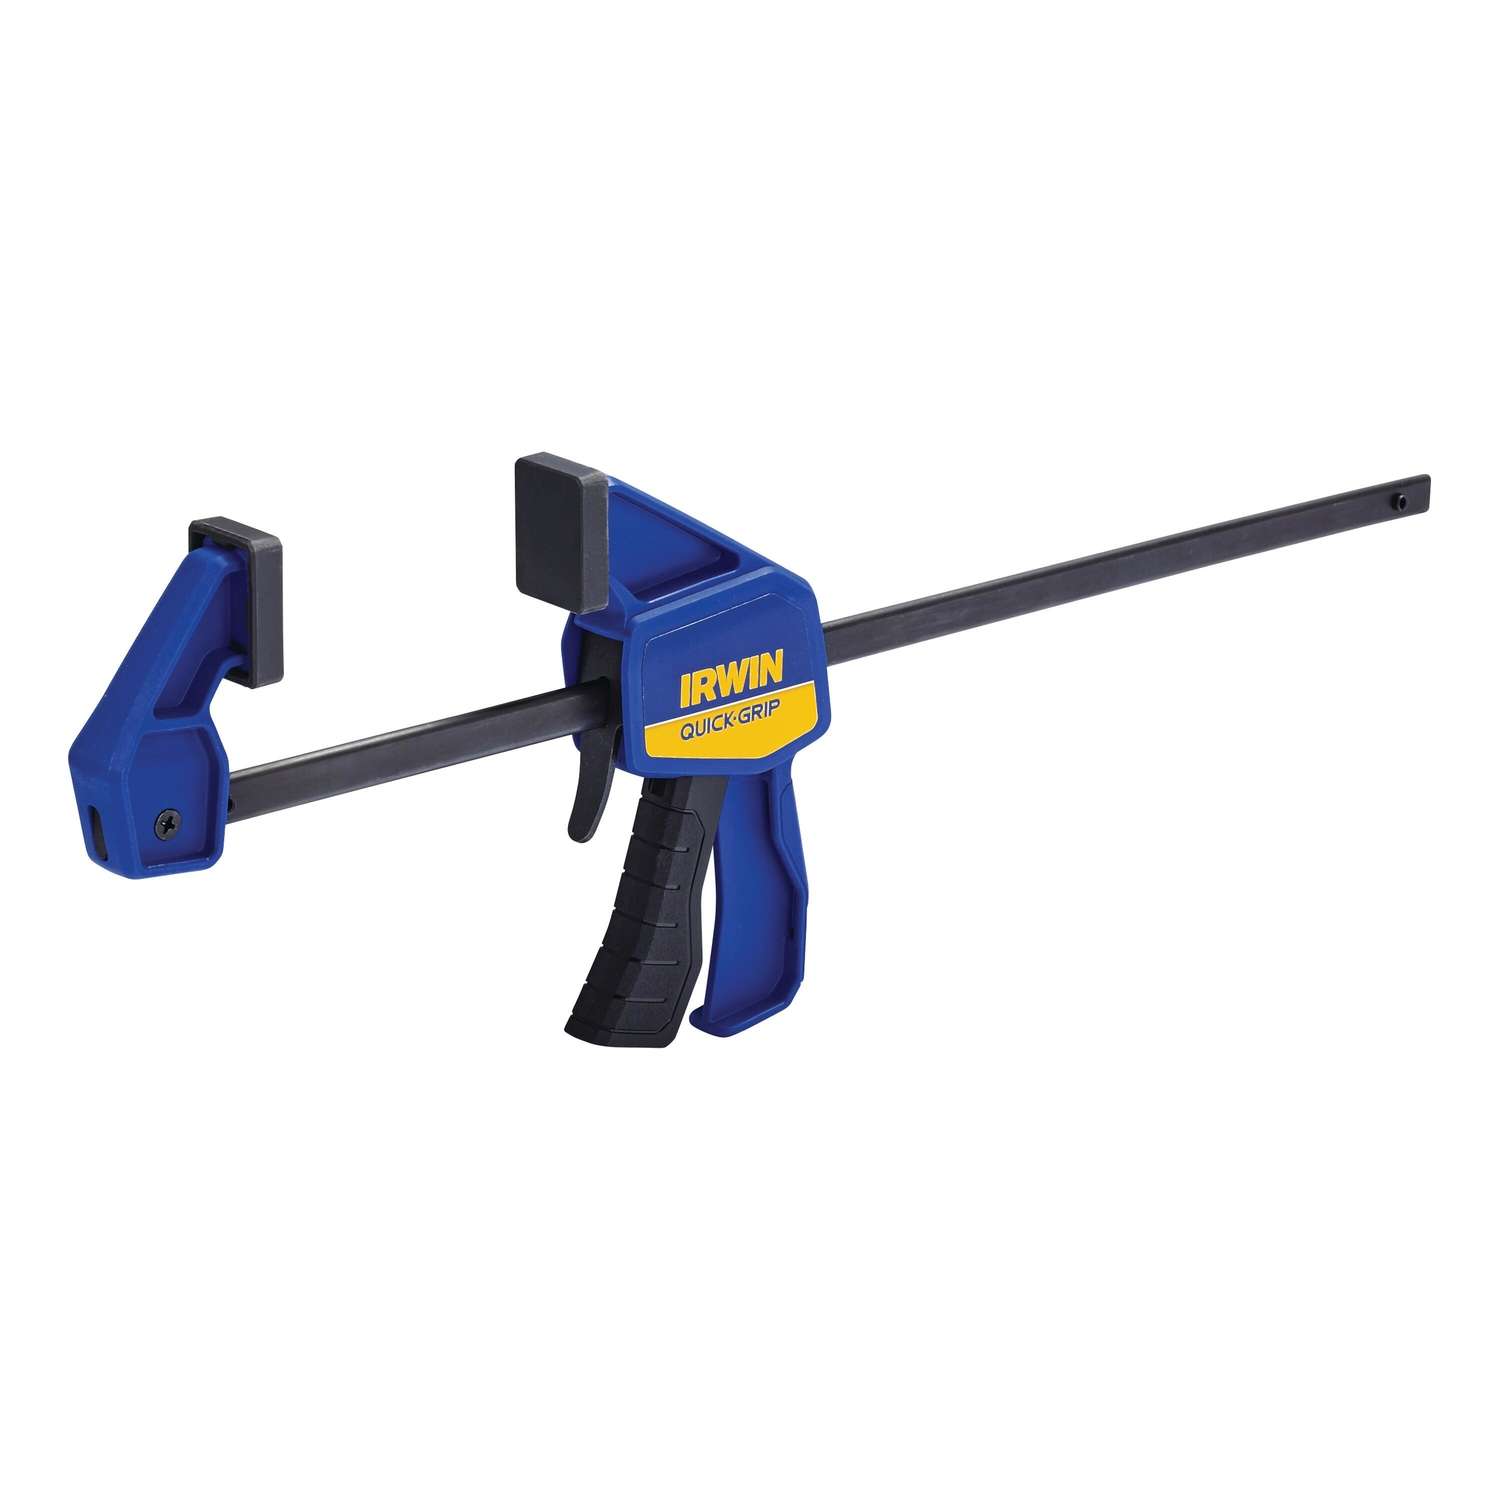 Irwin Quick-Grip Bar Clamp, Light-Duty, 12 Inches